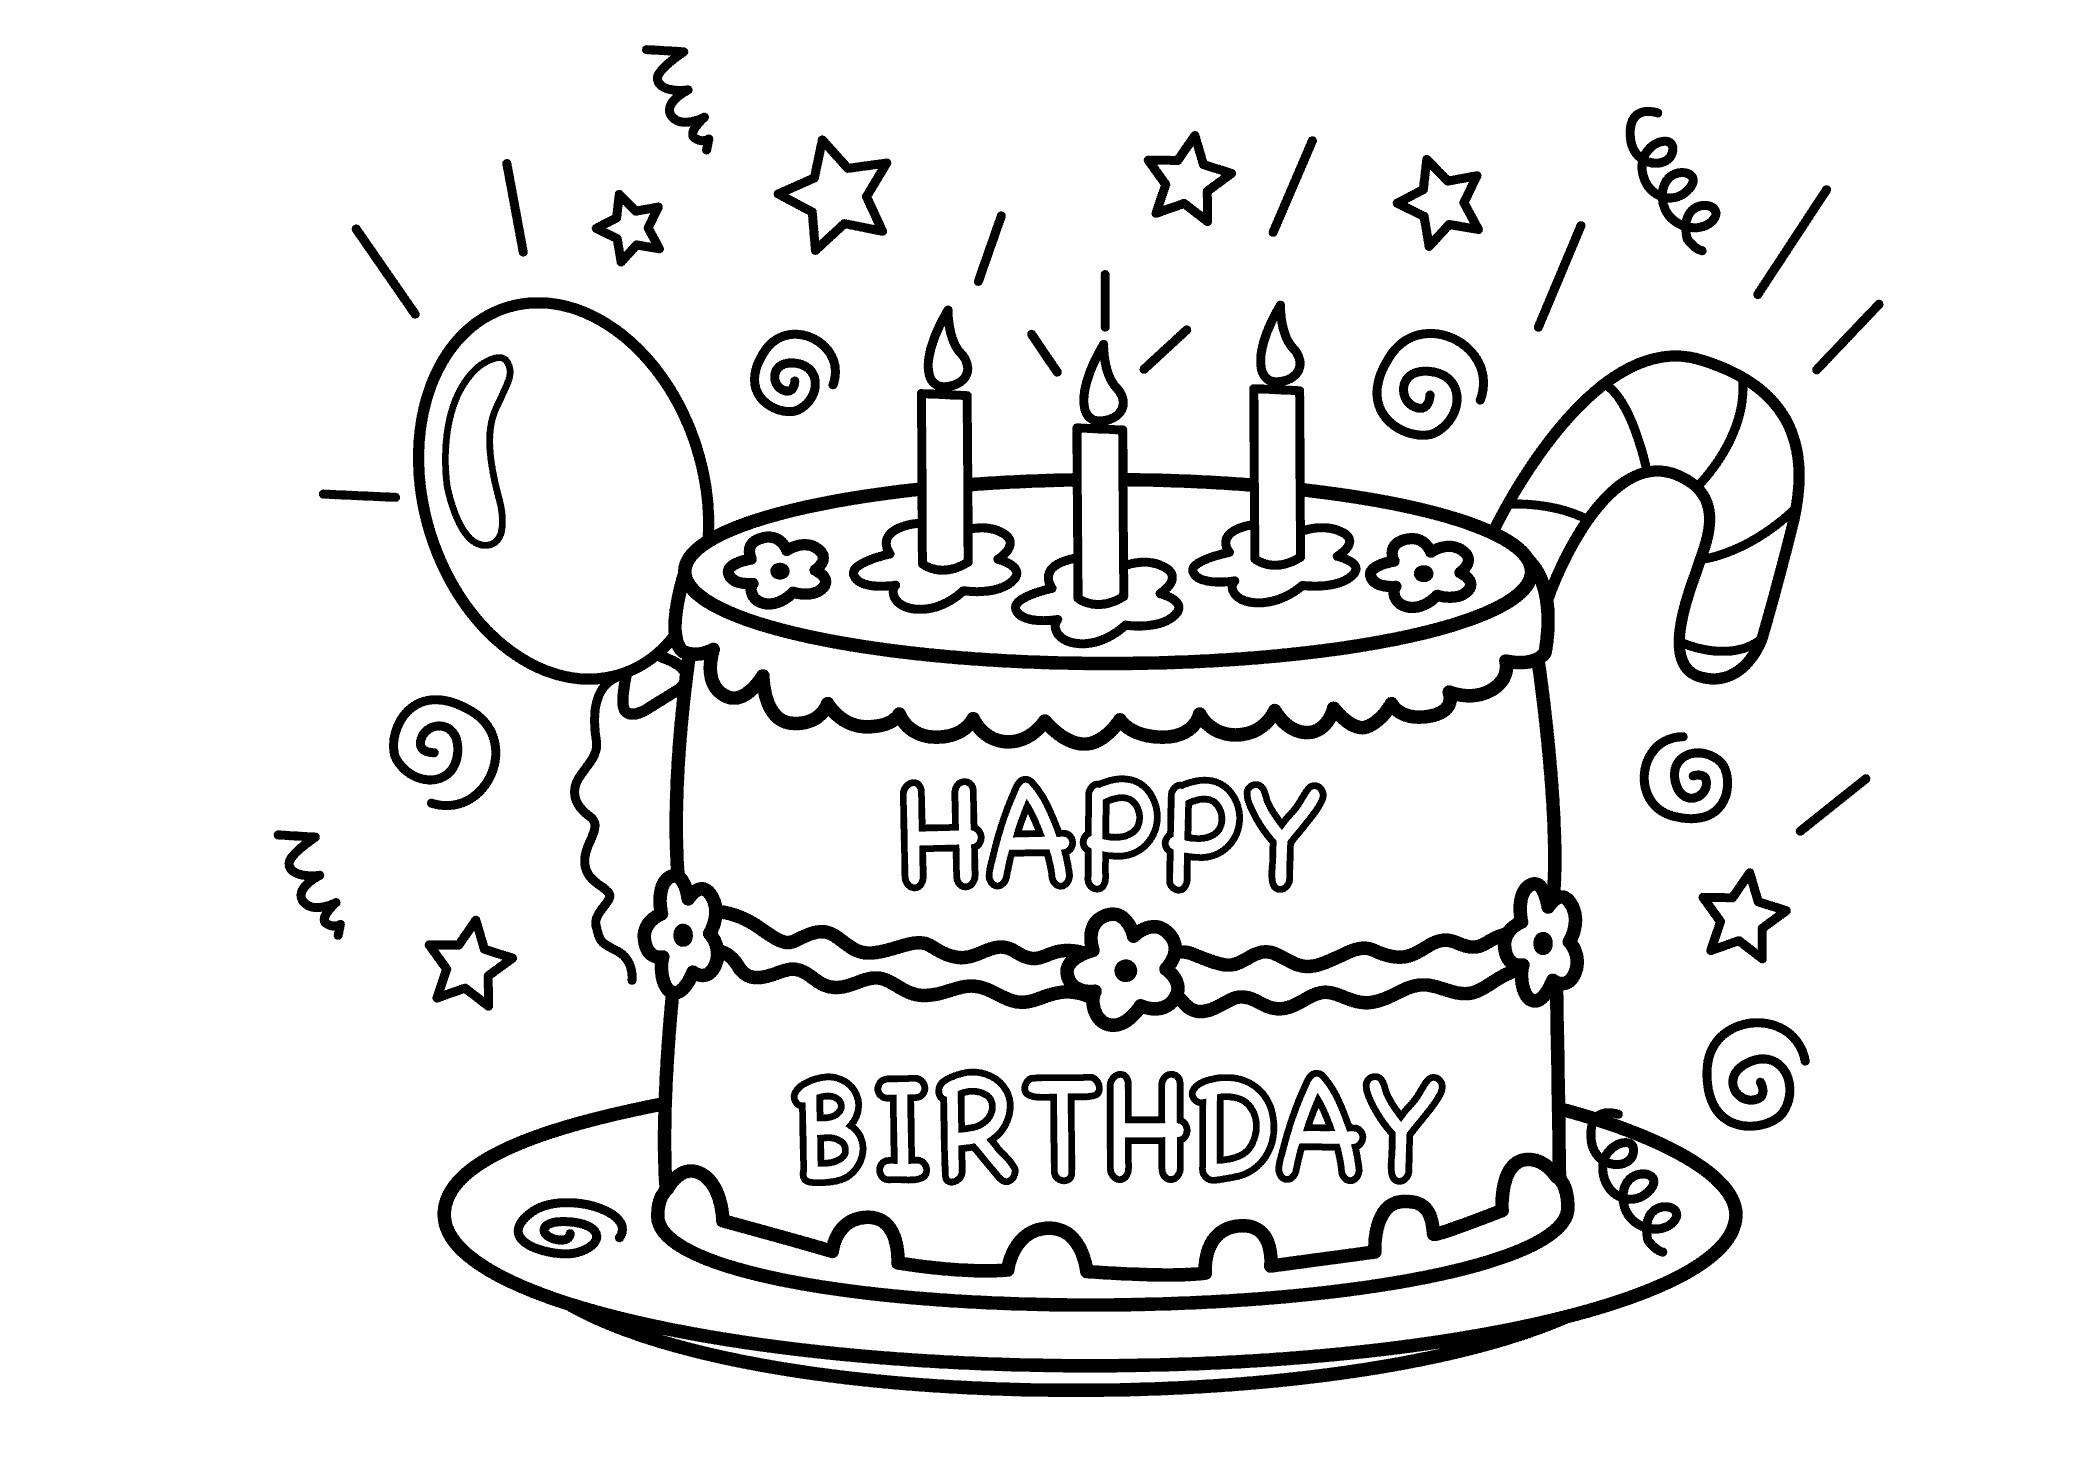 Birthday Cake Coloring Page Lovely Free Printable Birthday Cake Coloring Pages for Kids